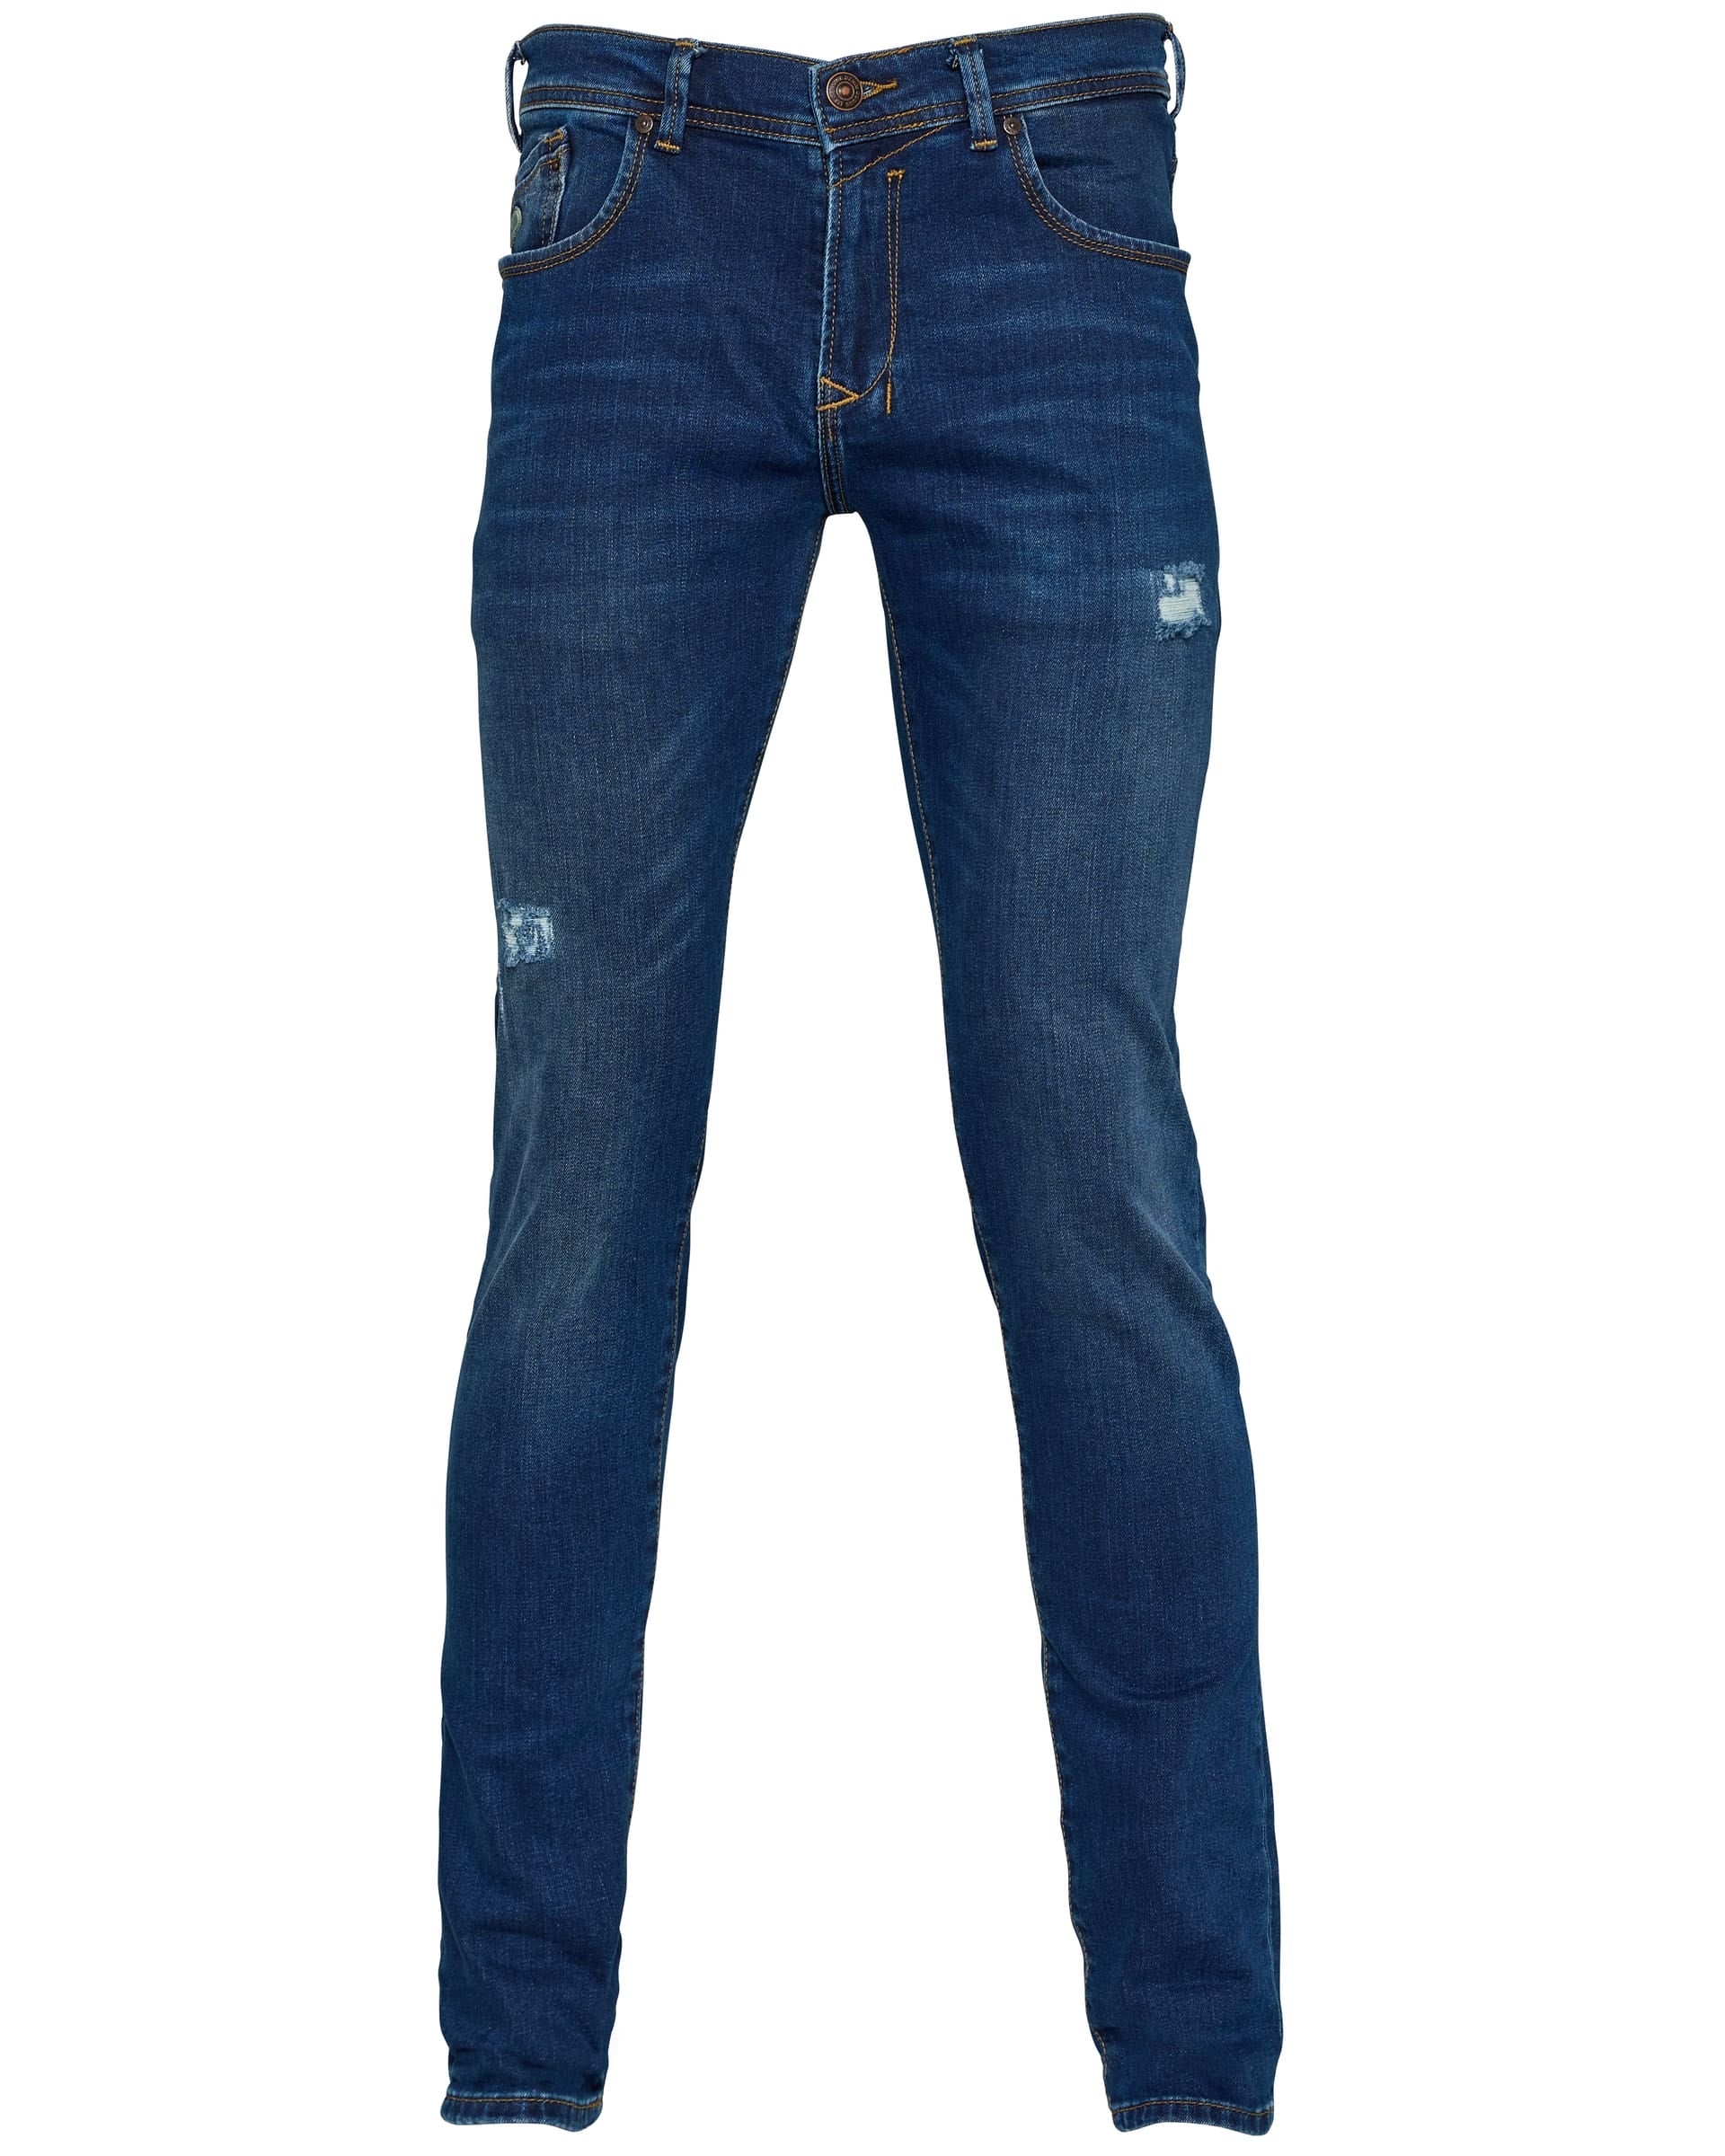 New Diego x Hosea Jean - Men's Jeans at Menzclub